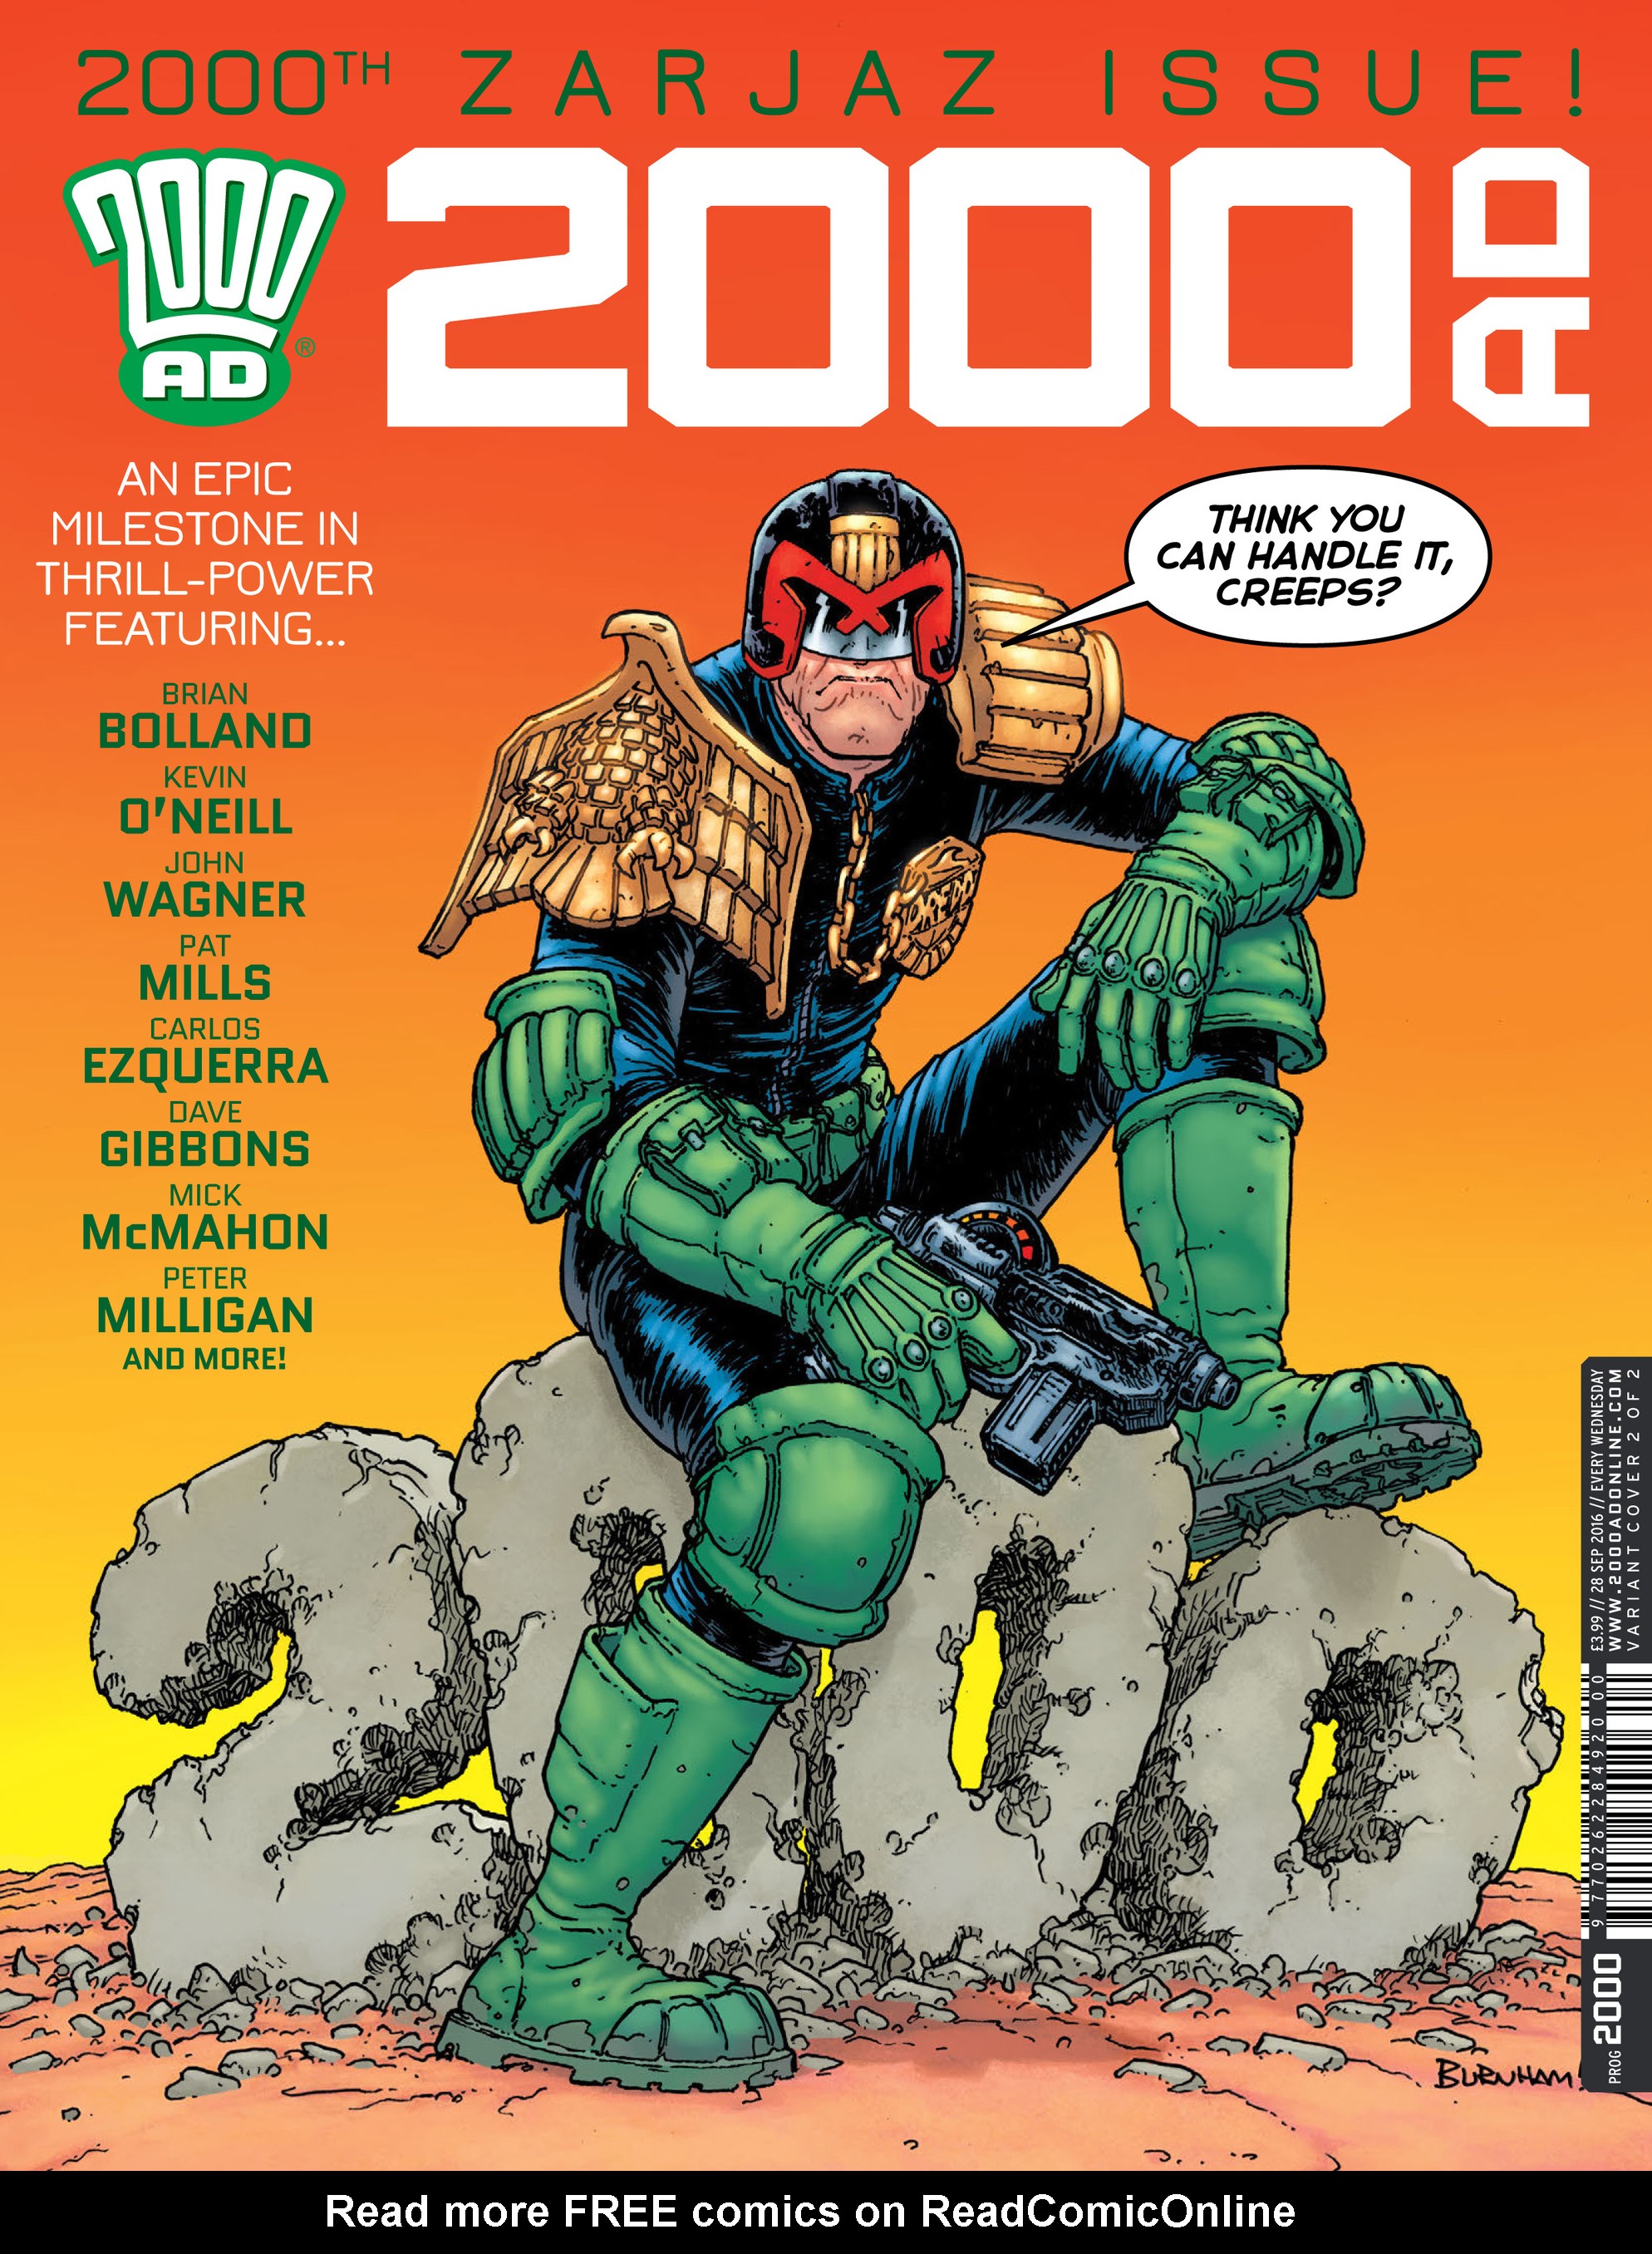 Read online 2000 AD comic -  Issue #2000 - 2